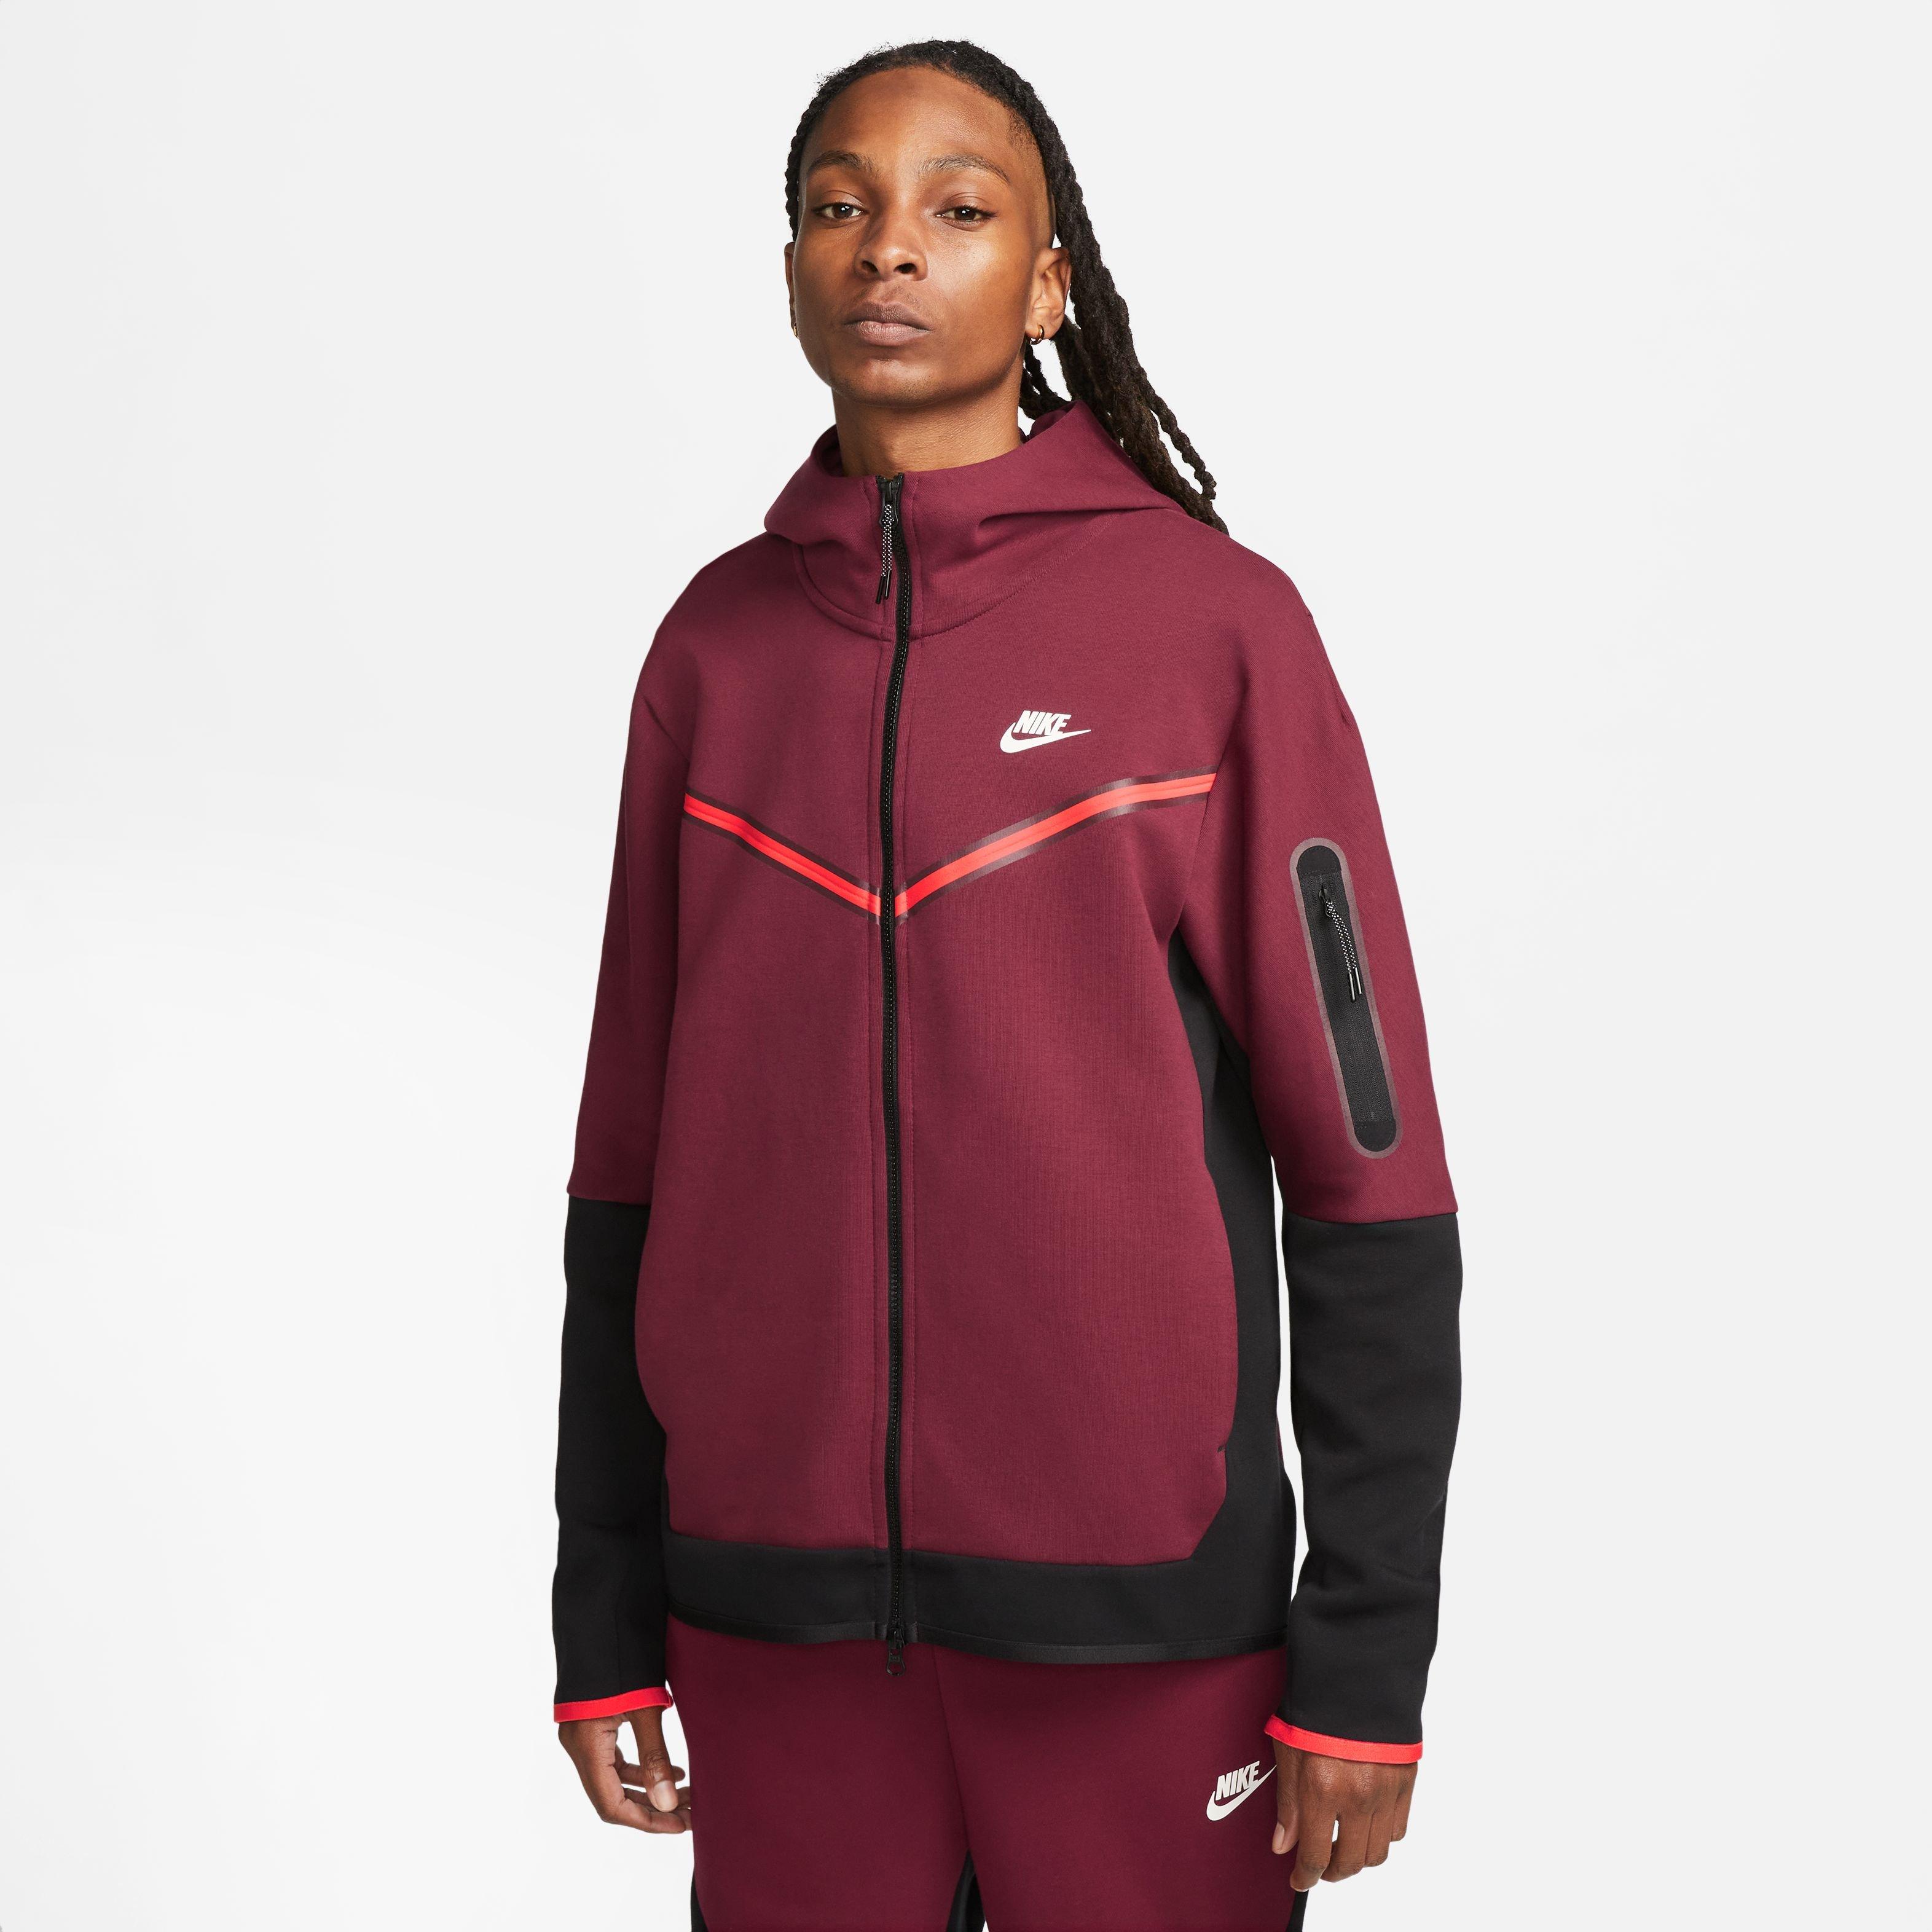 Red nike tech hoodie • Compare & find best price now »